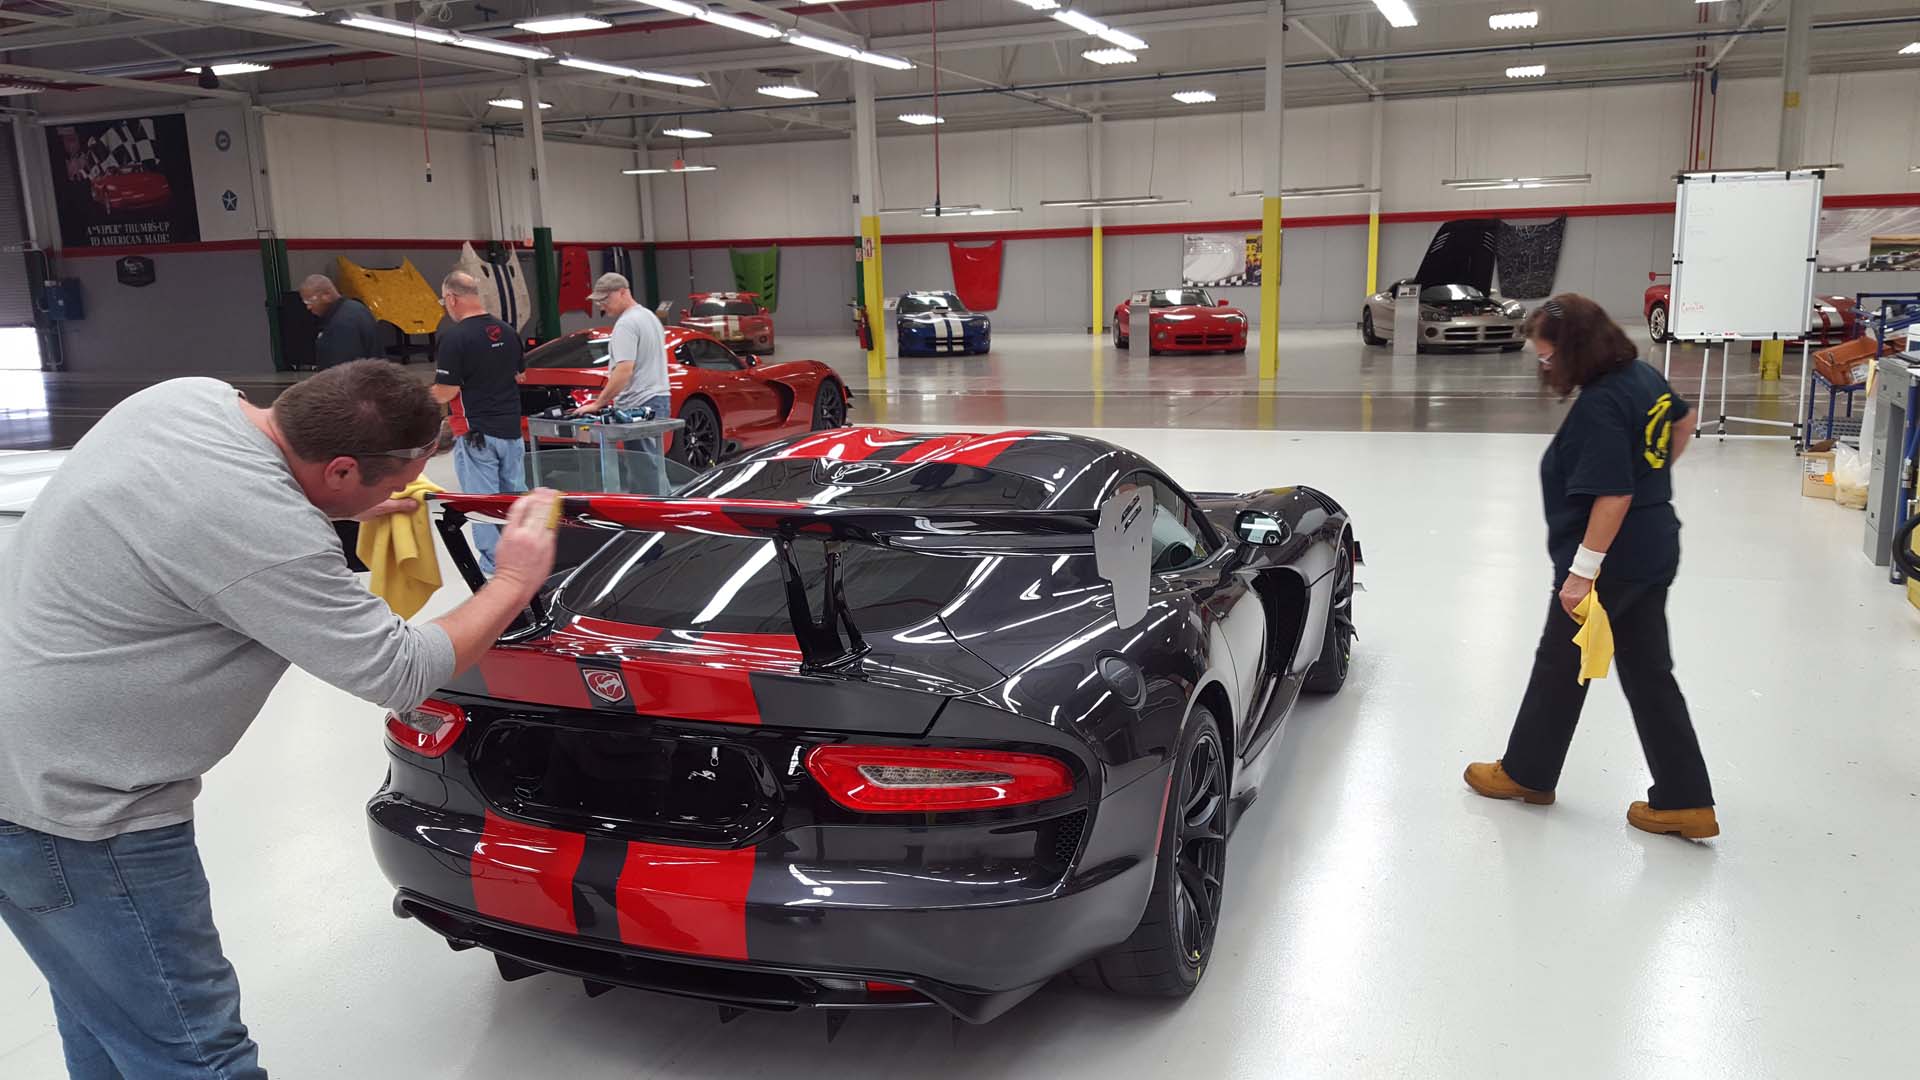 Every Viper is different, and they’re all flawless. In this photo, Steven Showalter and Bonnie Marth give a new Viper ACR a close-up inspection. This pair works at Prefix, the company who paints and preps all of the Viper’s body panels. They spend their day at Conner Avenue though, working under this flaw-revealing lighting and inspecting the paint and finish for any imperfections, no matter how small. In this photo, Showalter is making a final hand-buff of the rear spoiler, which he just finished re-buffing to remove some ‘orange peel’ in the paint.